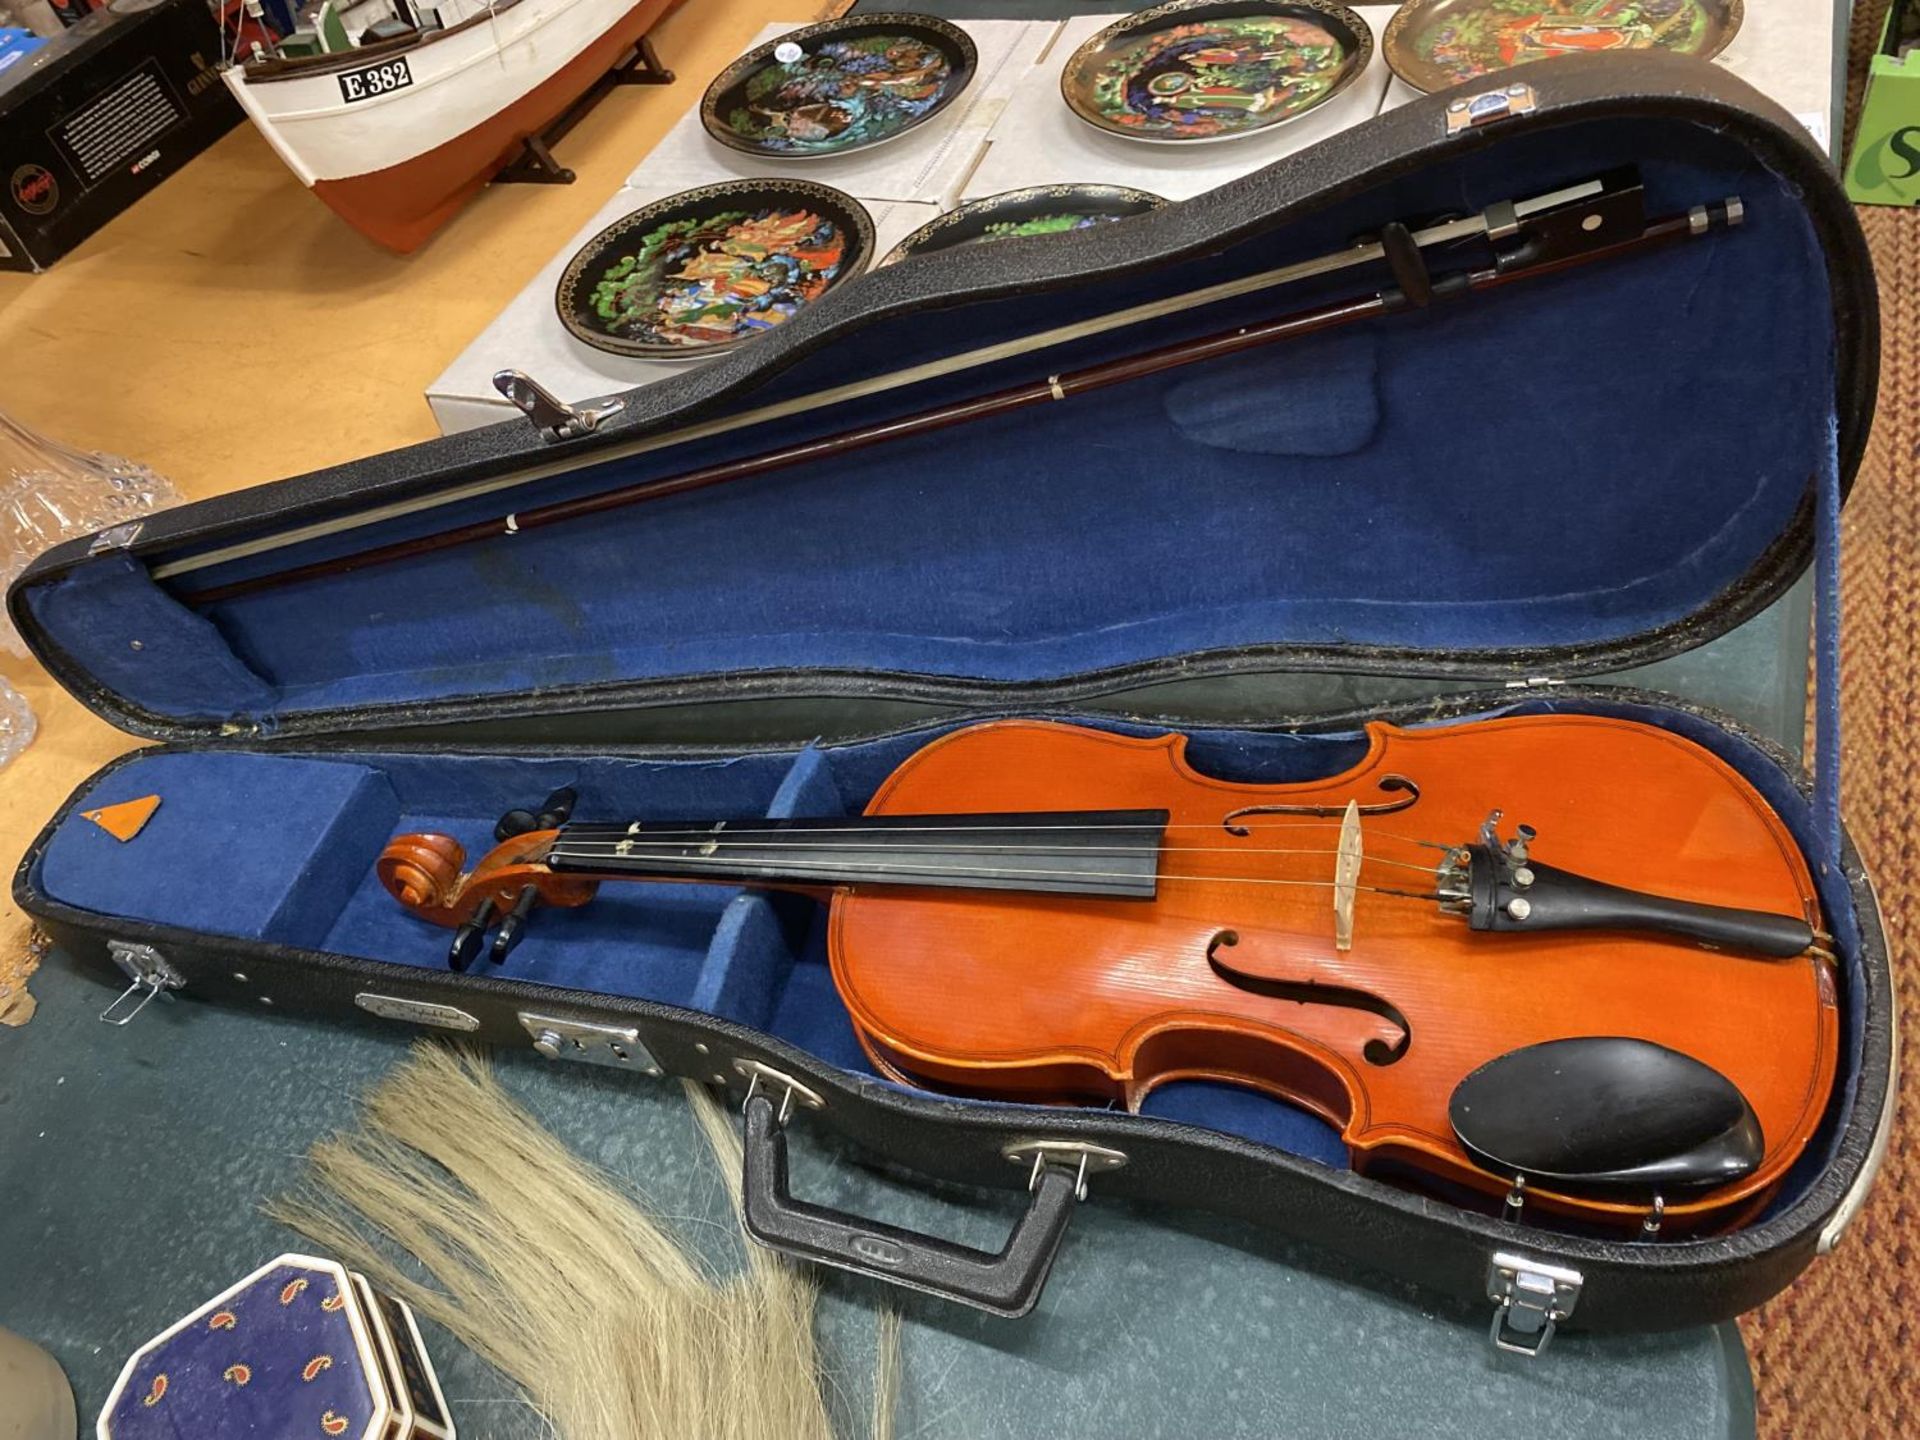 A CASED SKYLARK VIOLIN (3 STRINGS) WITH THE BOW